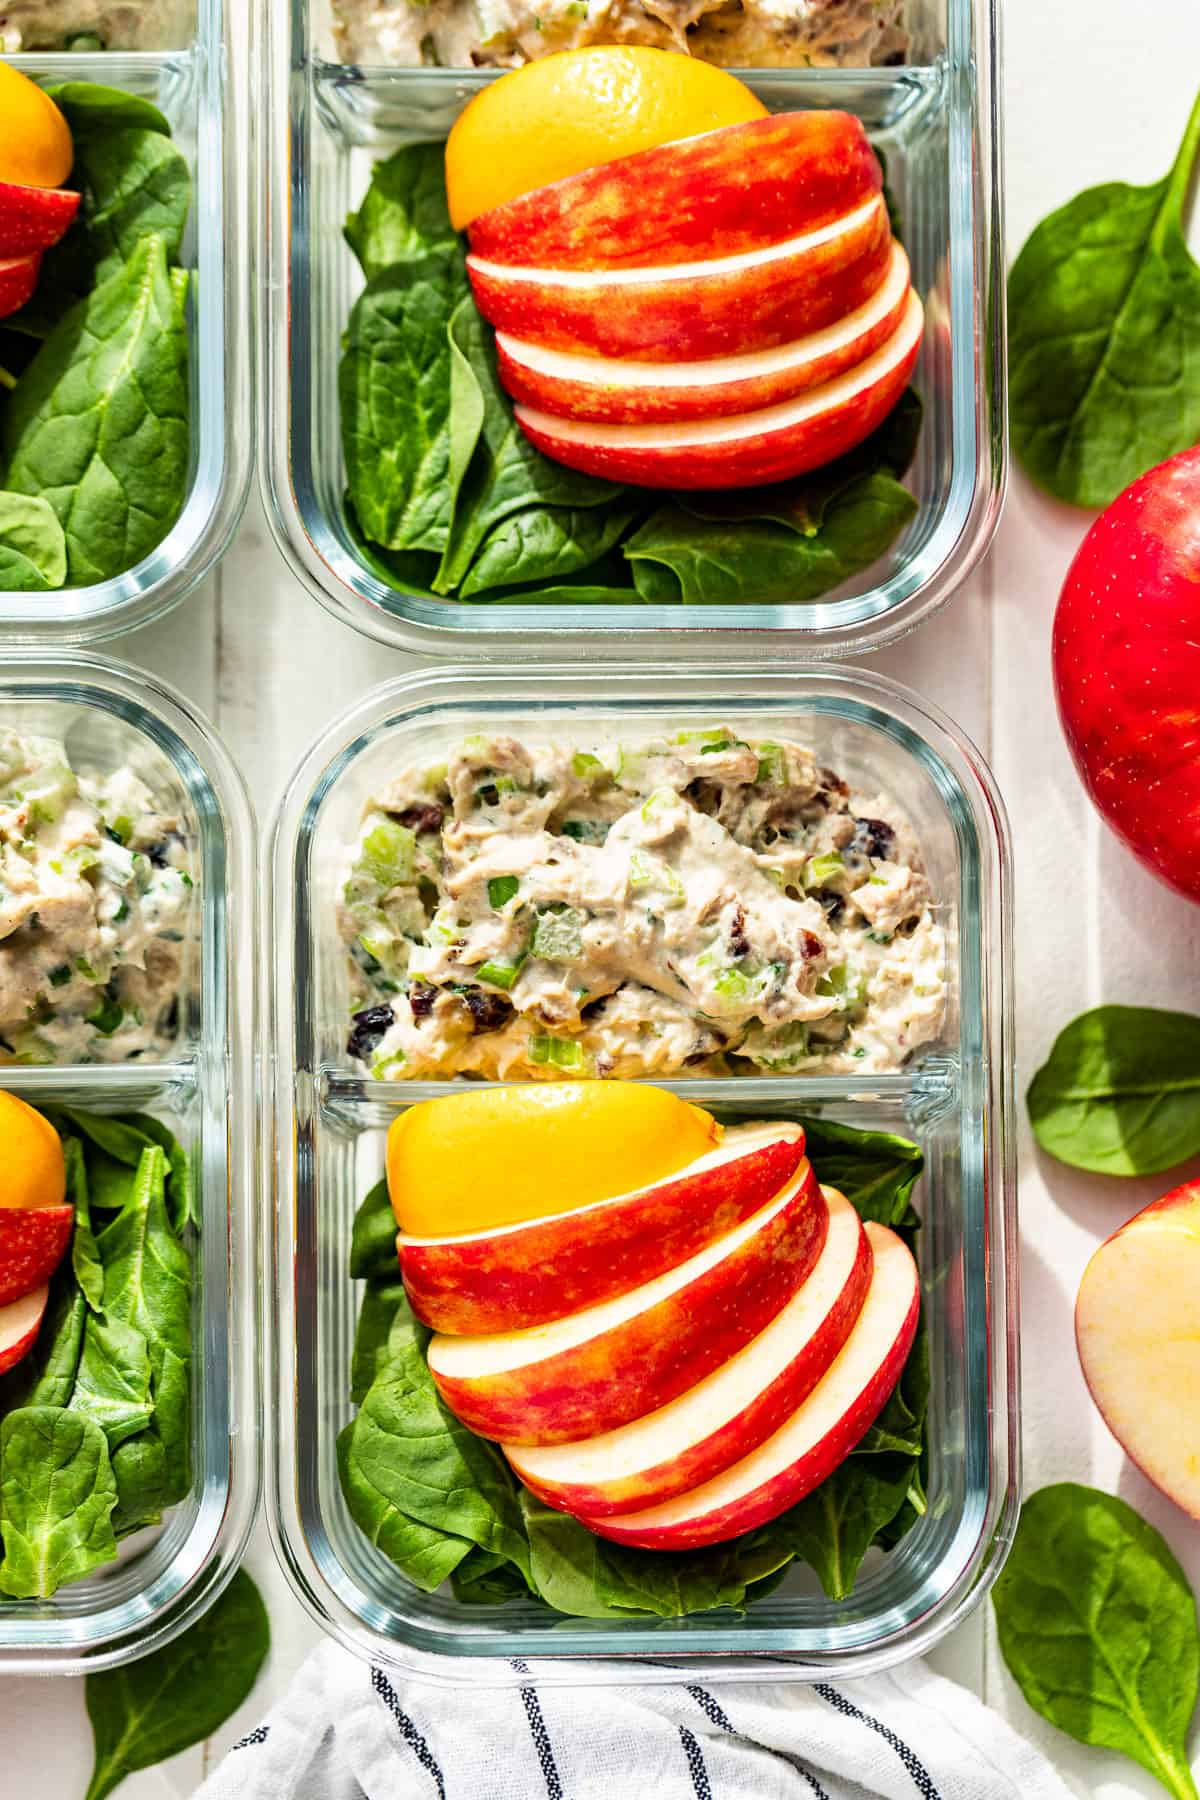 Downwards view of 4 meal prep containers filled with Healthy Tuna Salad, spinach, sliced apples, and a lemon wedge.